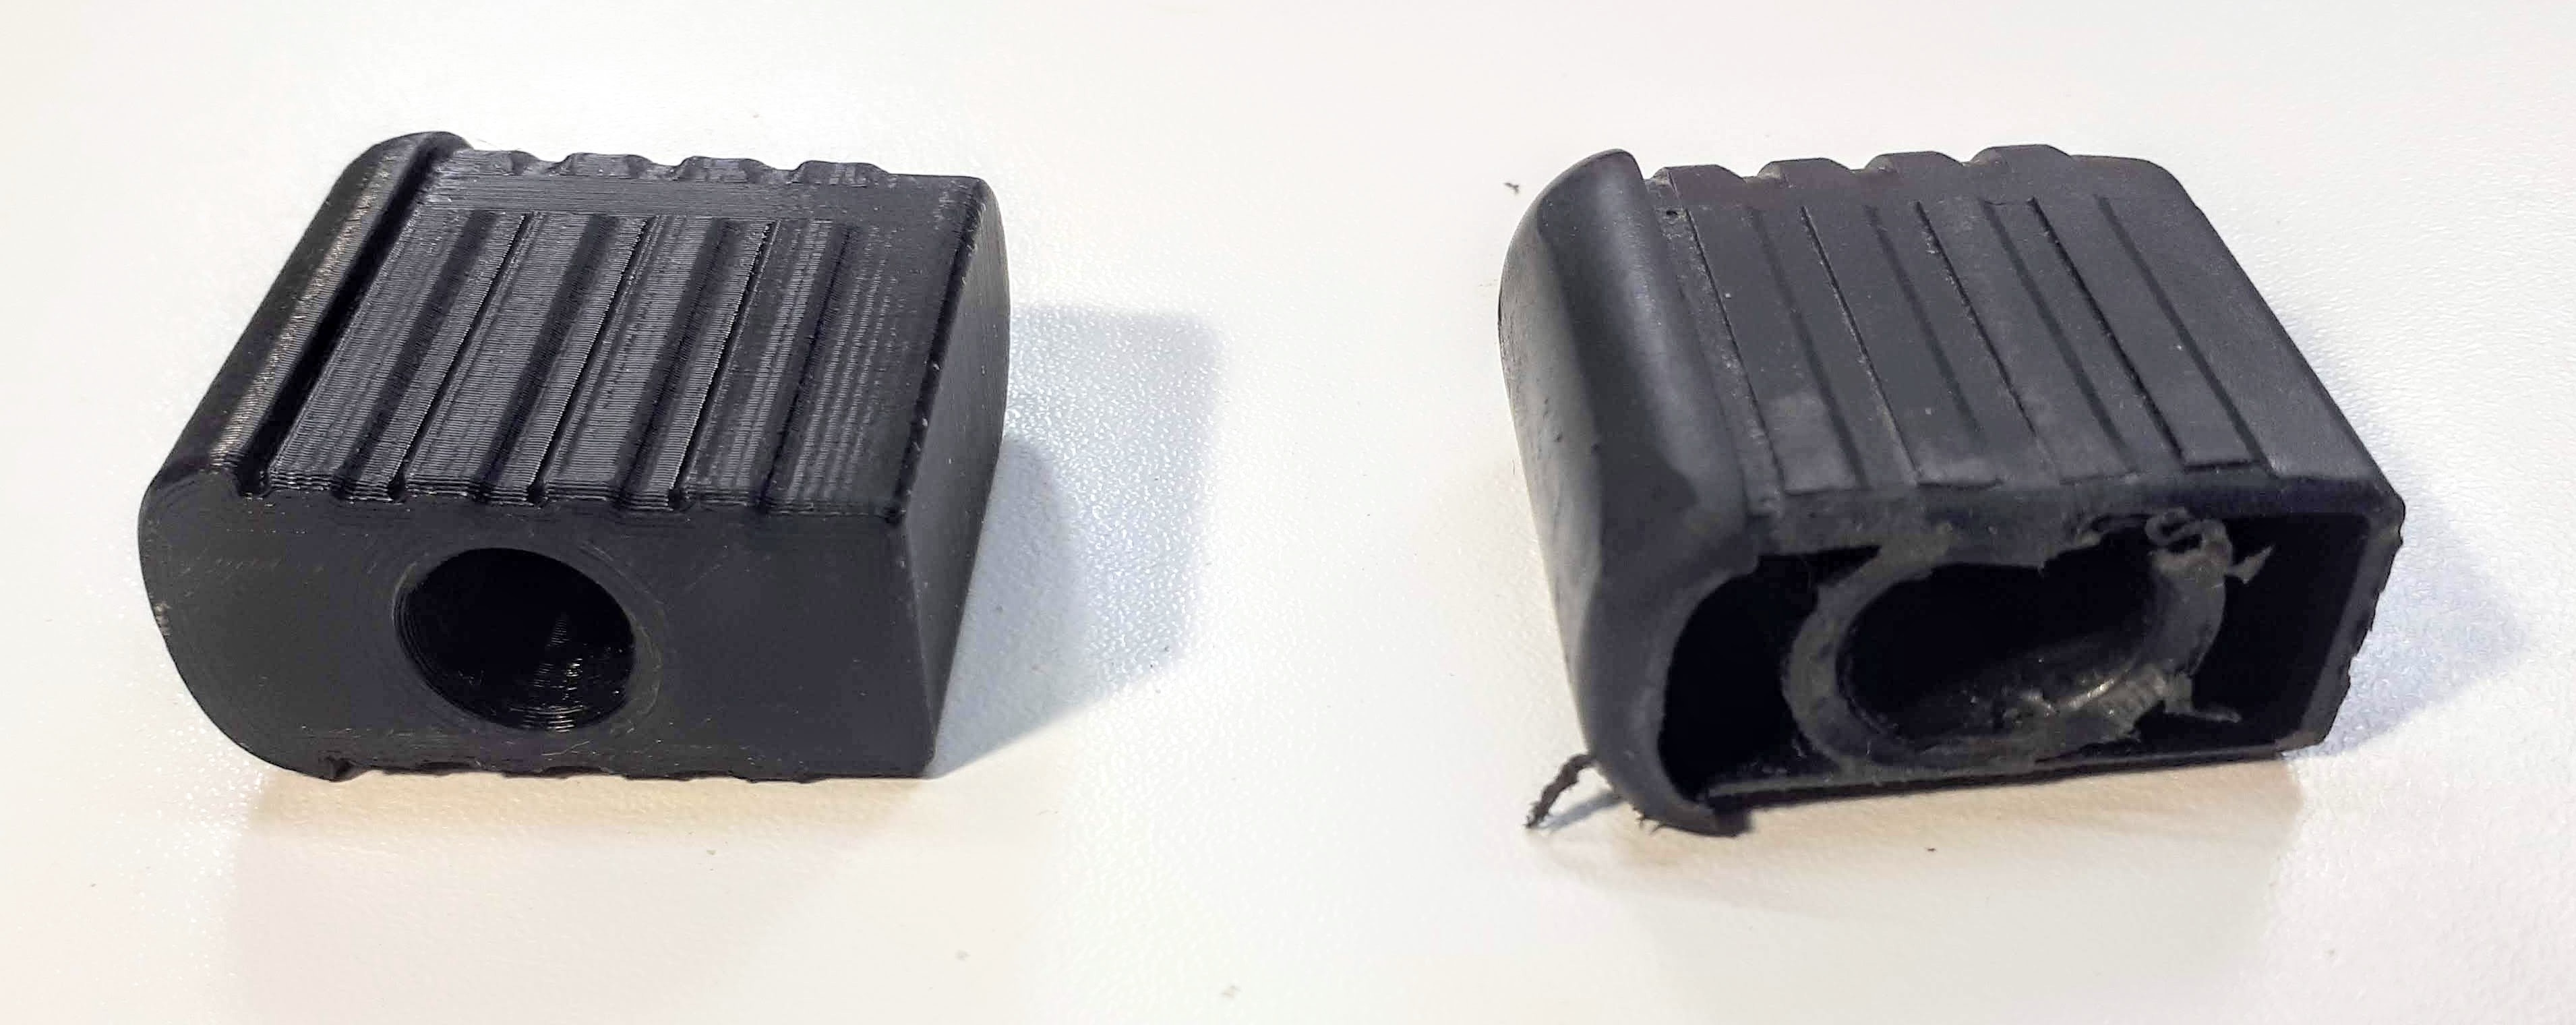 Socket replacement for IKEA Torkel office chair